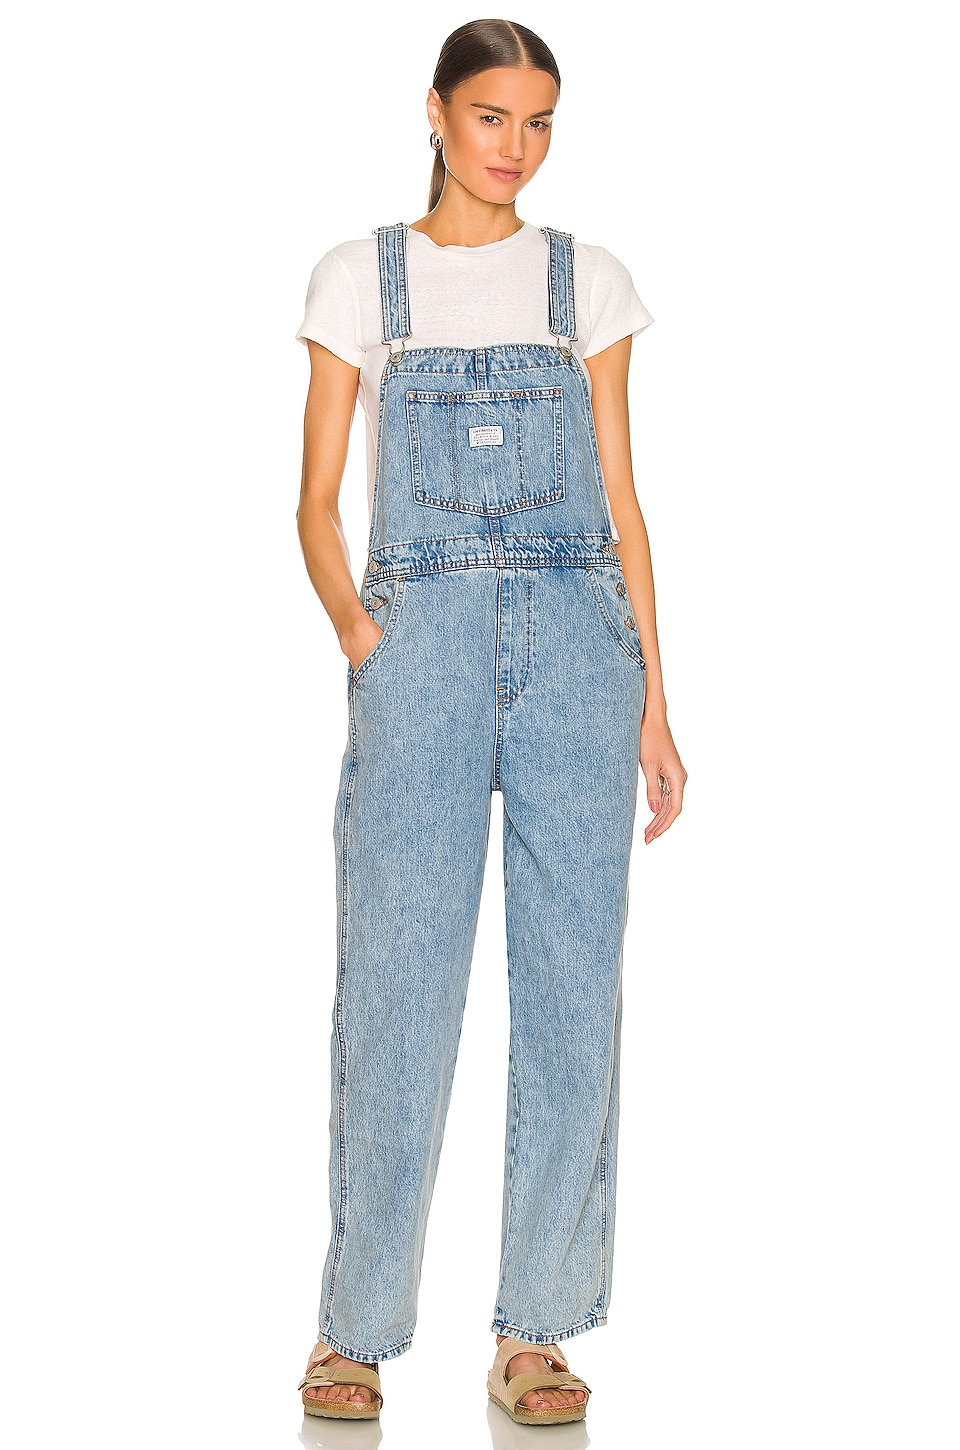 LEVI'S Vintage Overall in No Stone Unturned | REVOLVE